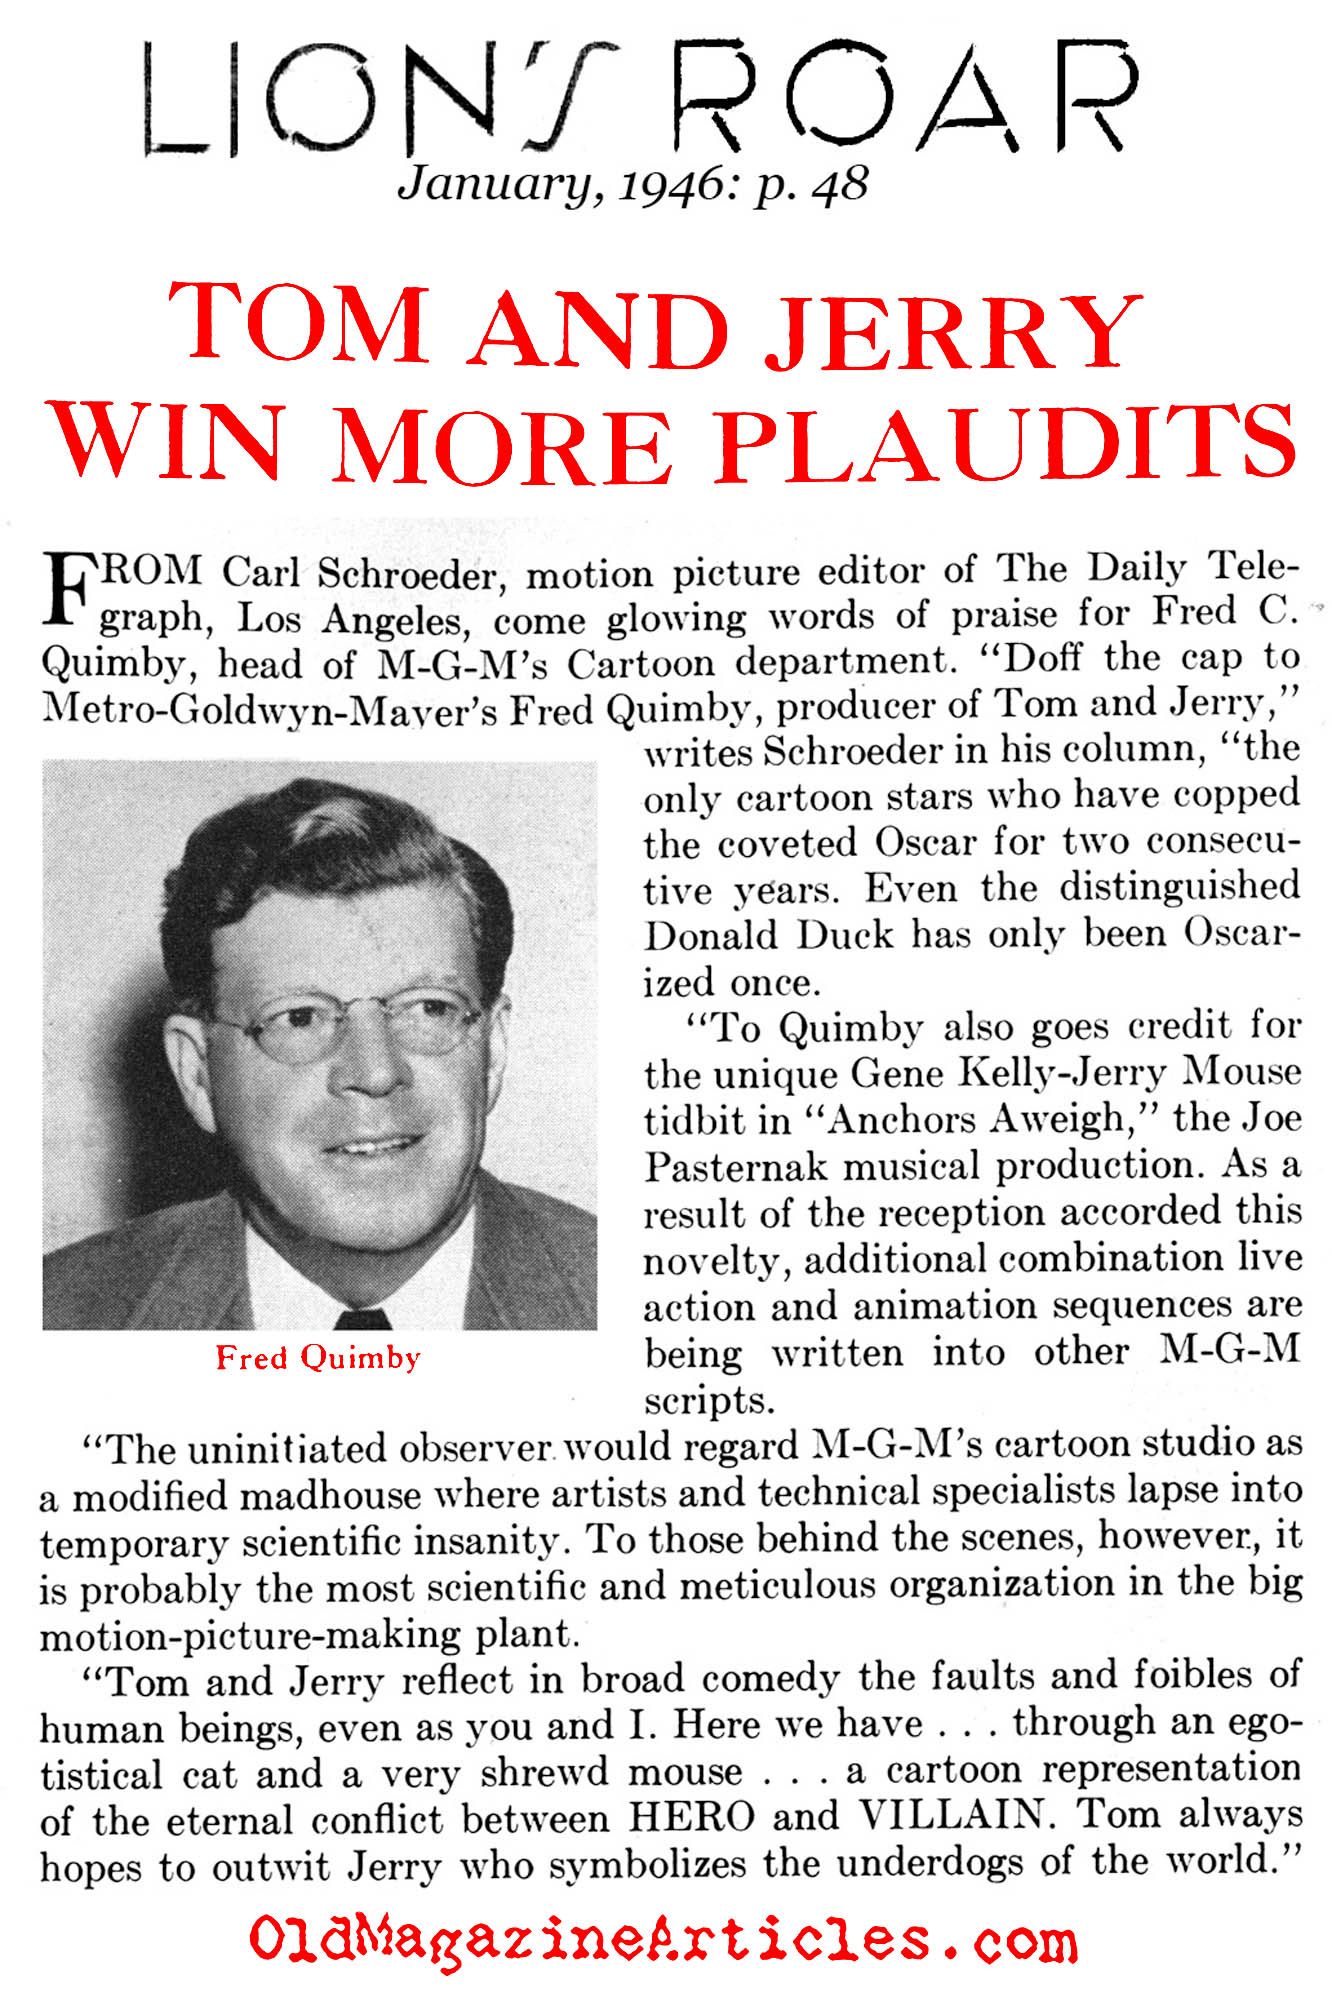 SECOND OSCAR FOR TOM AND JERRY CARTOON,ACADEMY AWARDS FOR TOM AND JERRY  CARTOON SERIES,2ND ACADEMY AWARD FOR TOM AND JERRY CARTOON SERIES,ACADEMY  AWARD OF FRED QUIMBY, - Magazine Article - Old Magazine